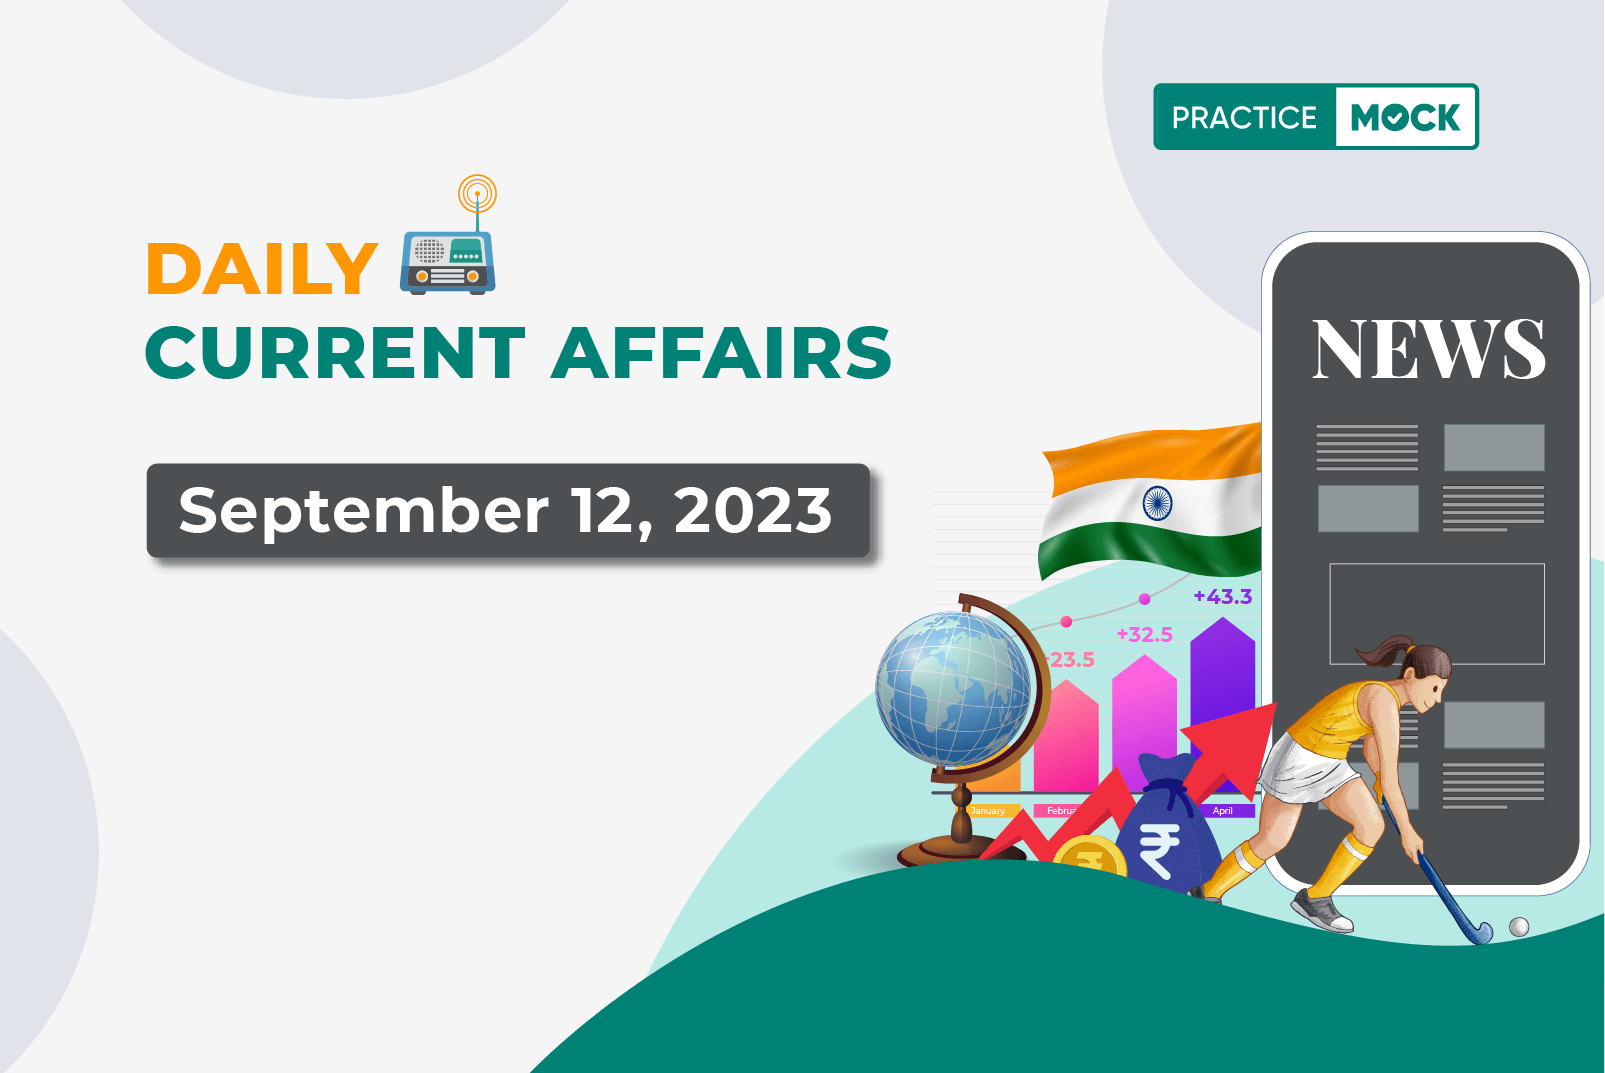 Daily Current Affairs- September 12, 2023